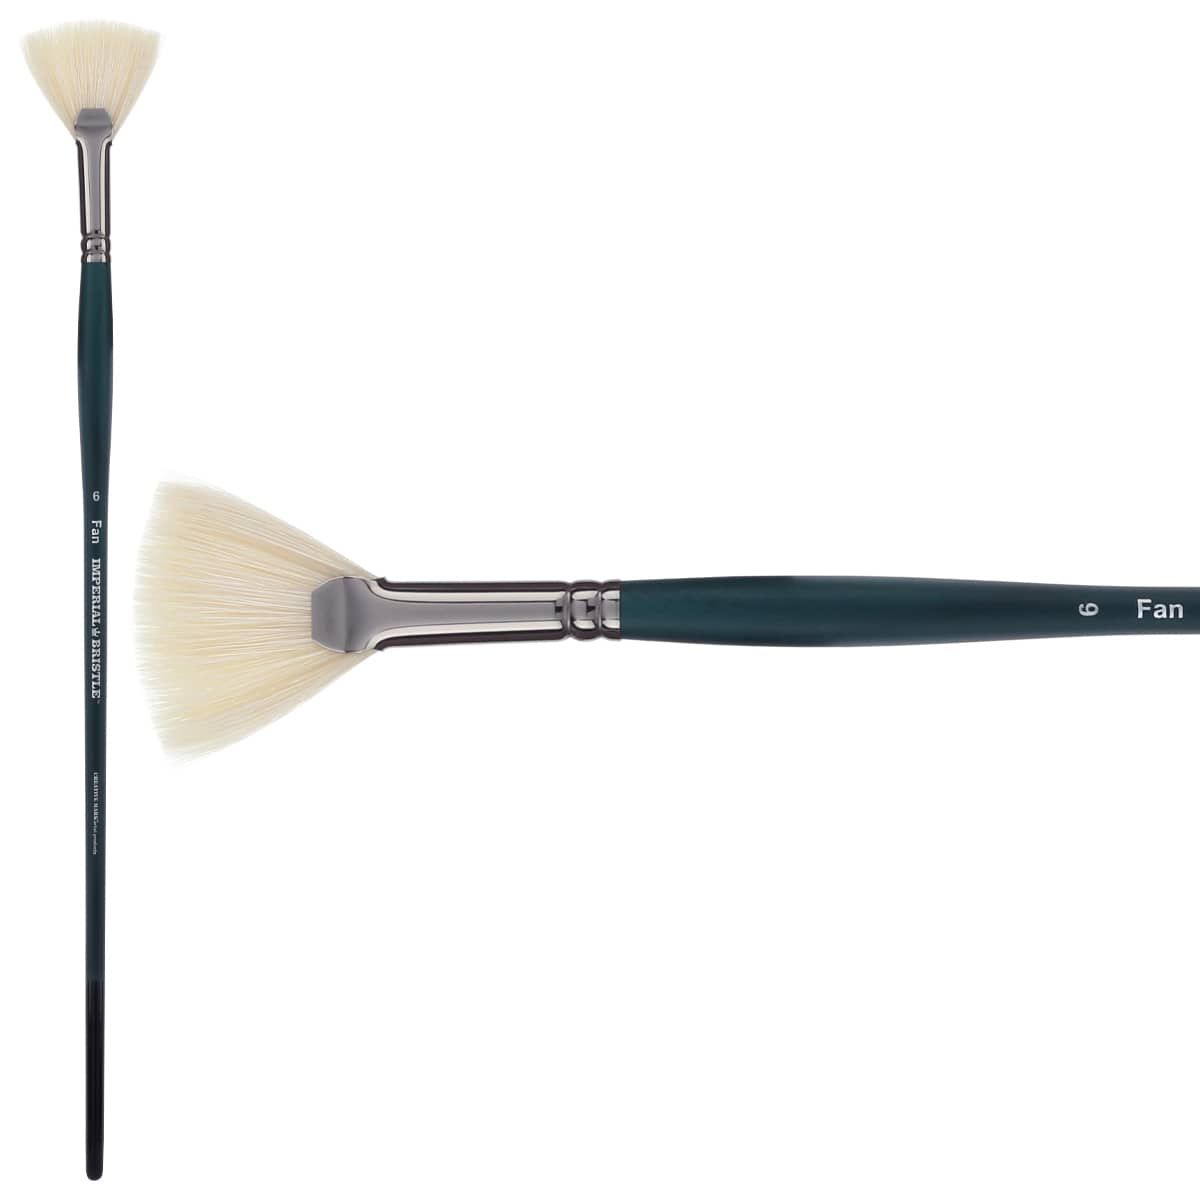 PURE SABLE FAN BRUSHES #2 and #6